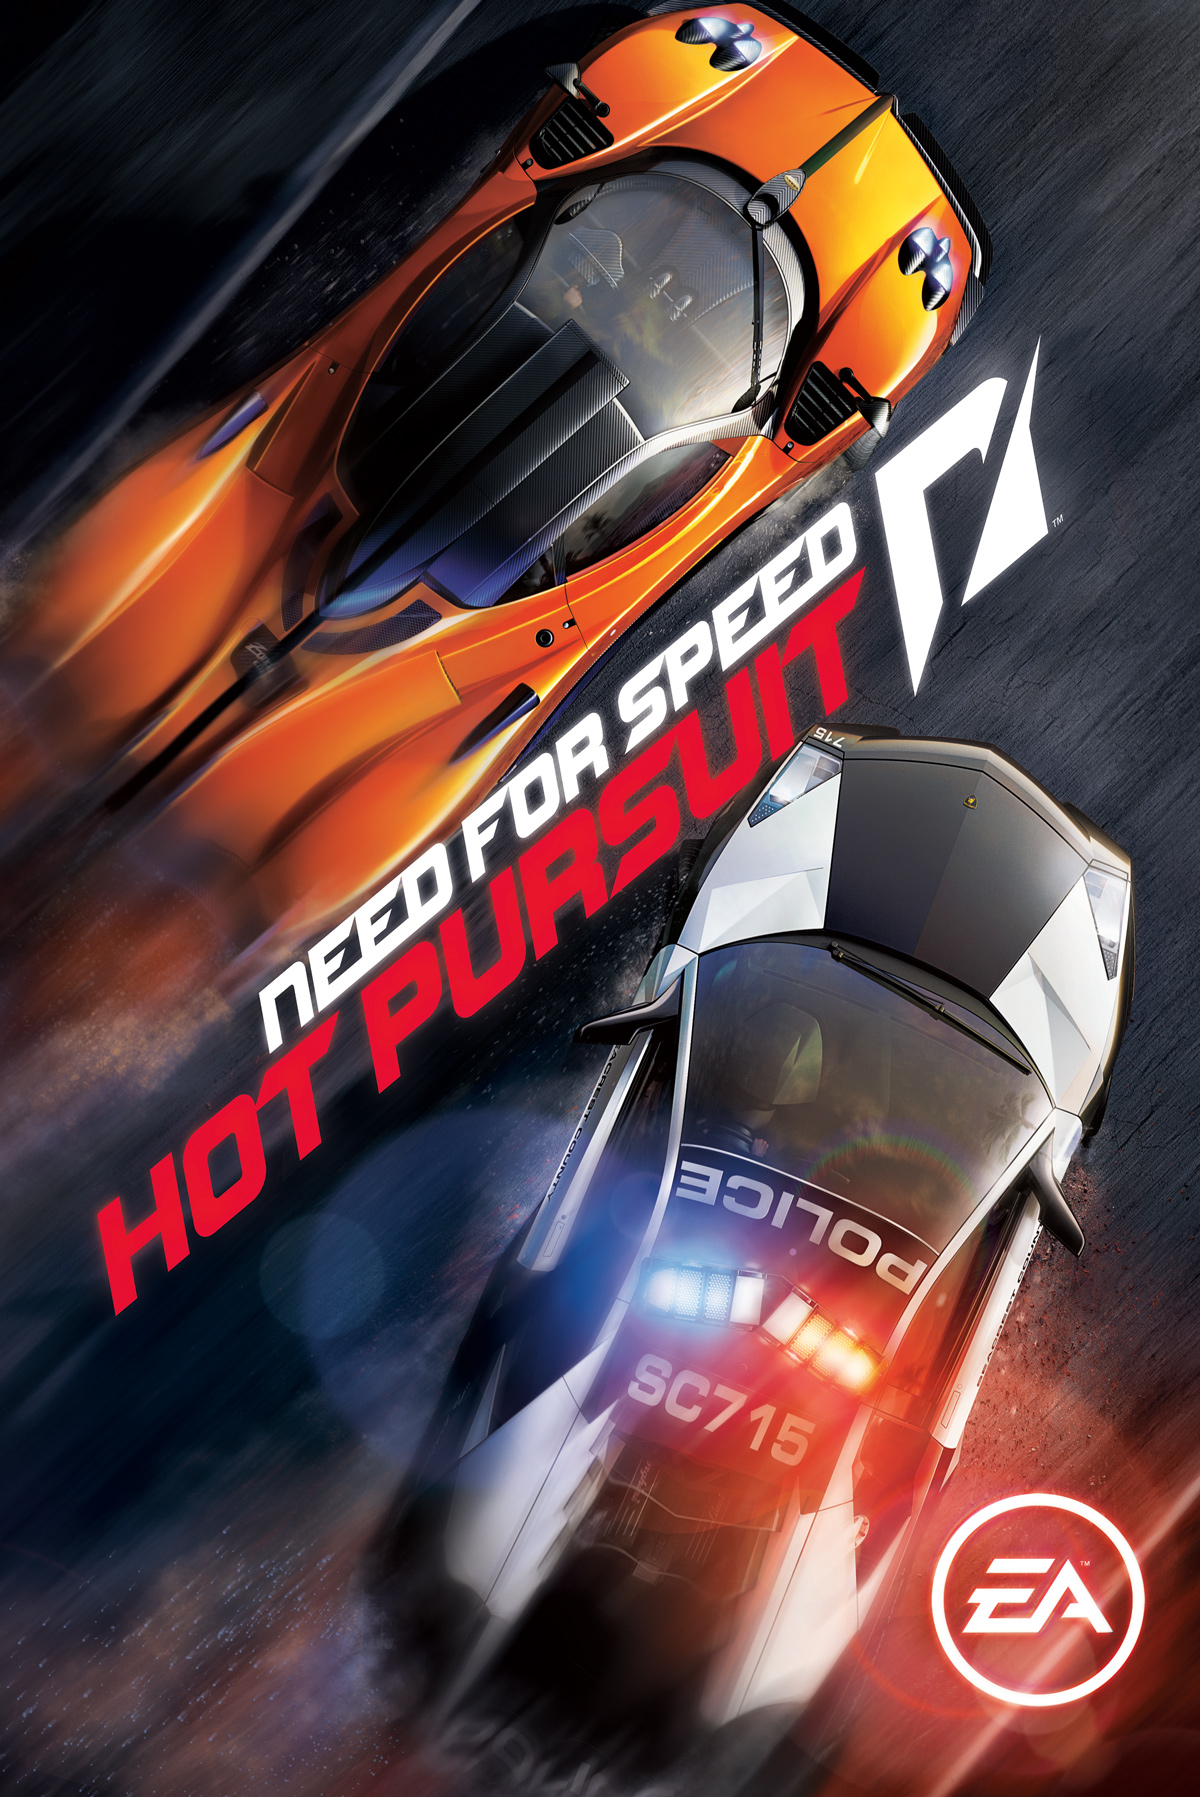 need for speed hot pursuit 2 release date 2012